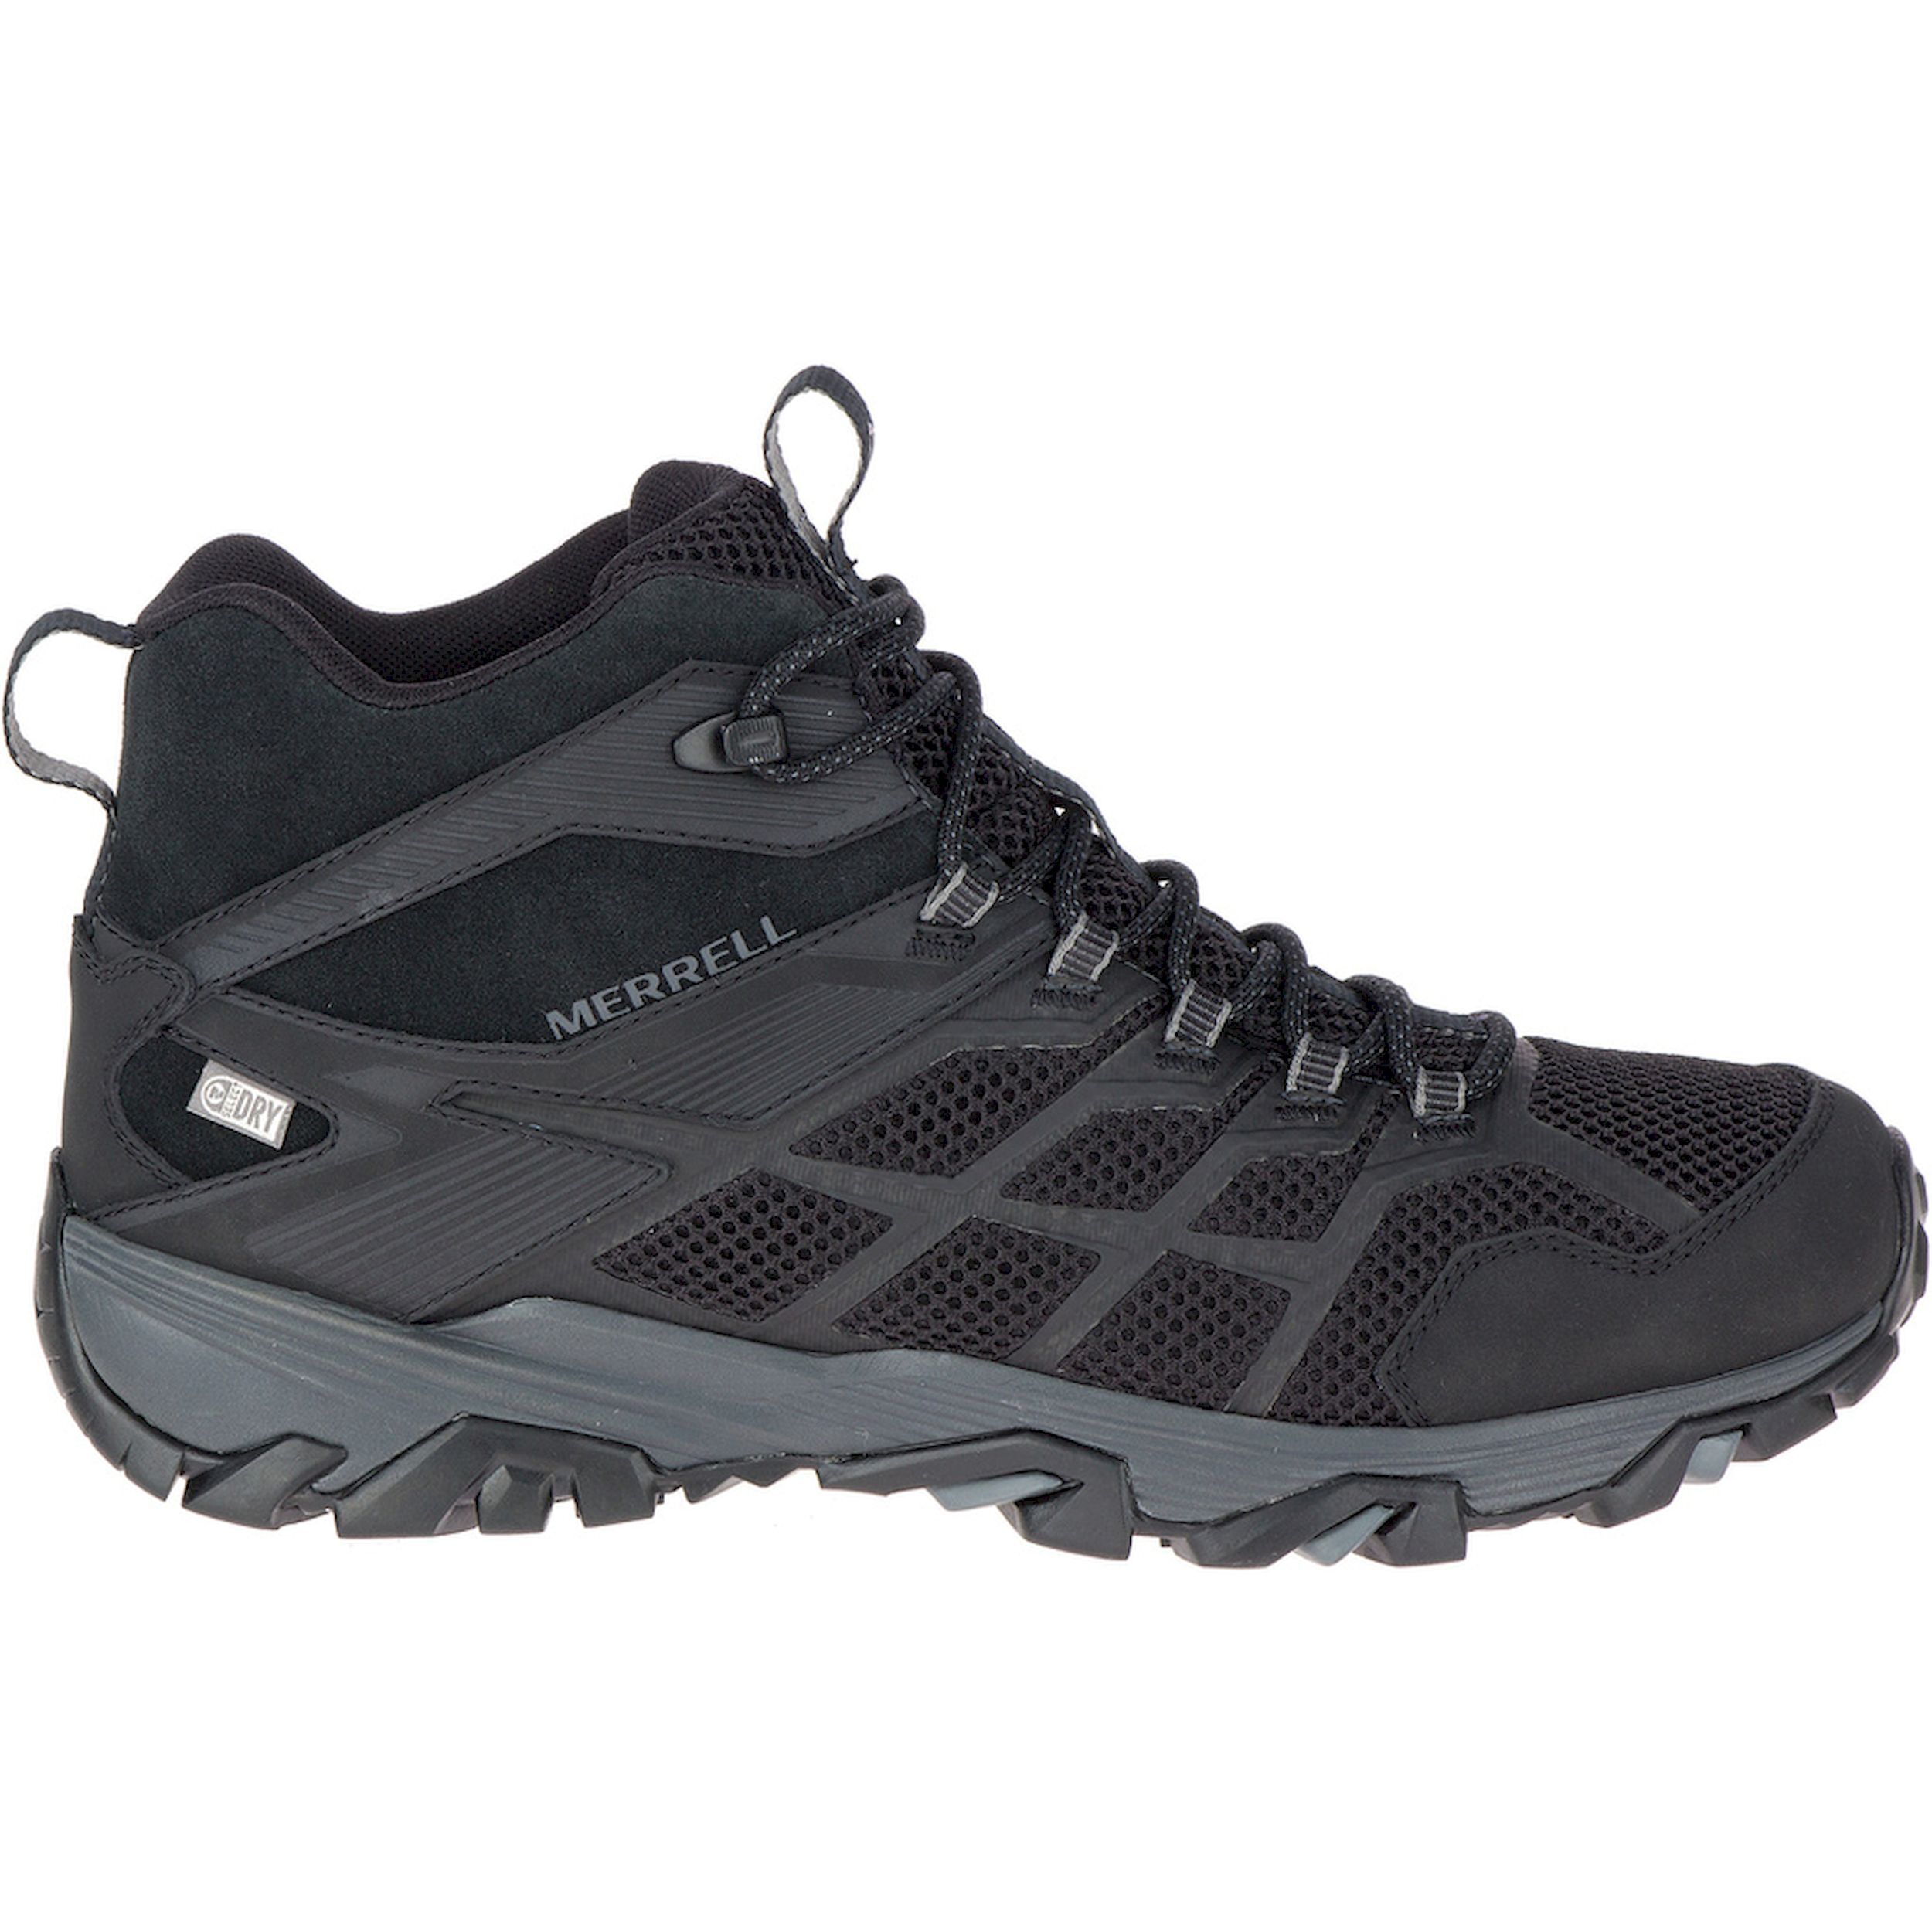 Merrell Moab Fst 2 Ice+ Thermo - Botas de trekking - Mujer